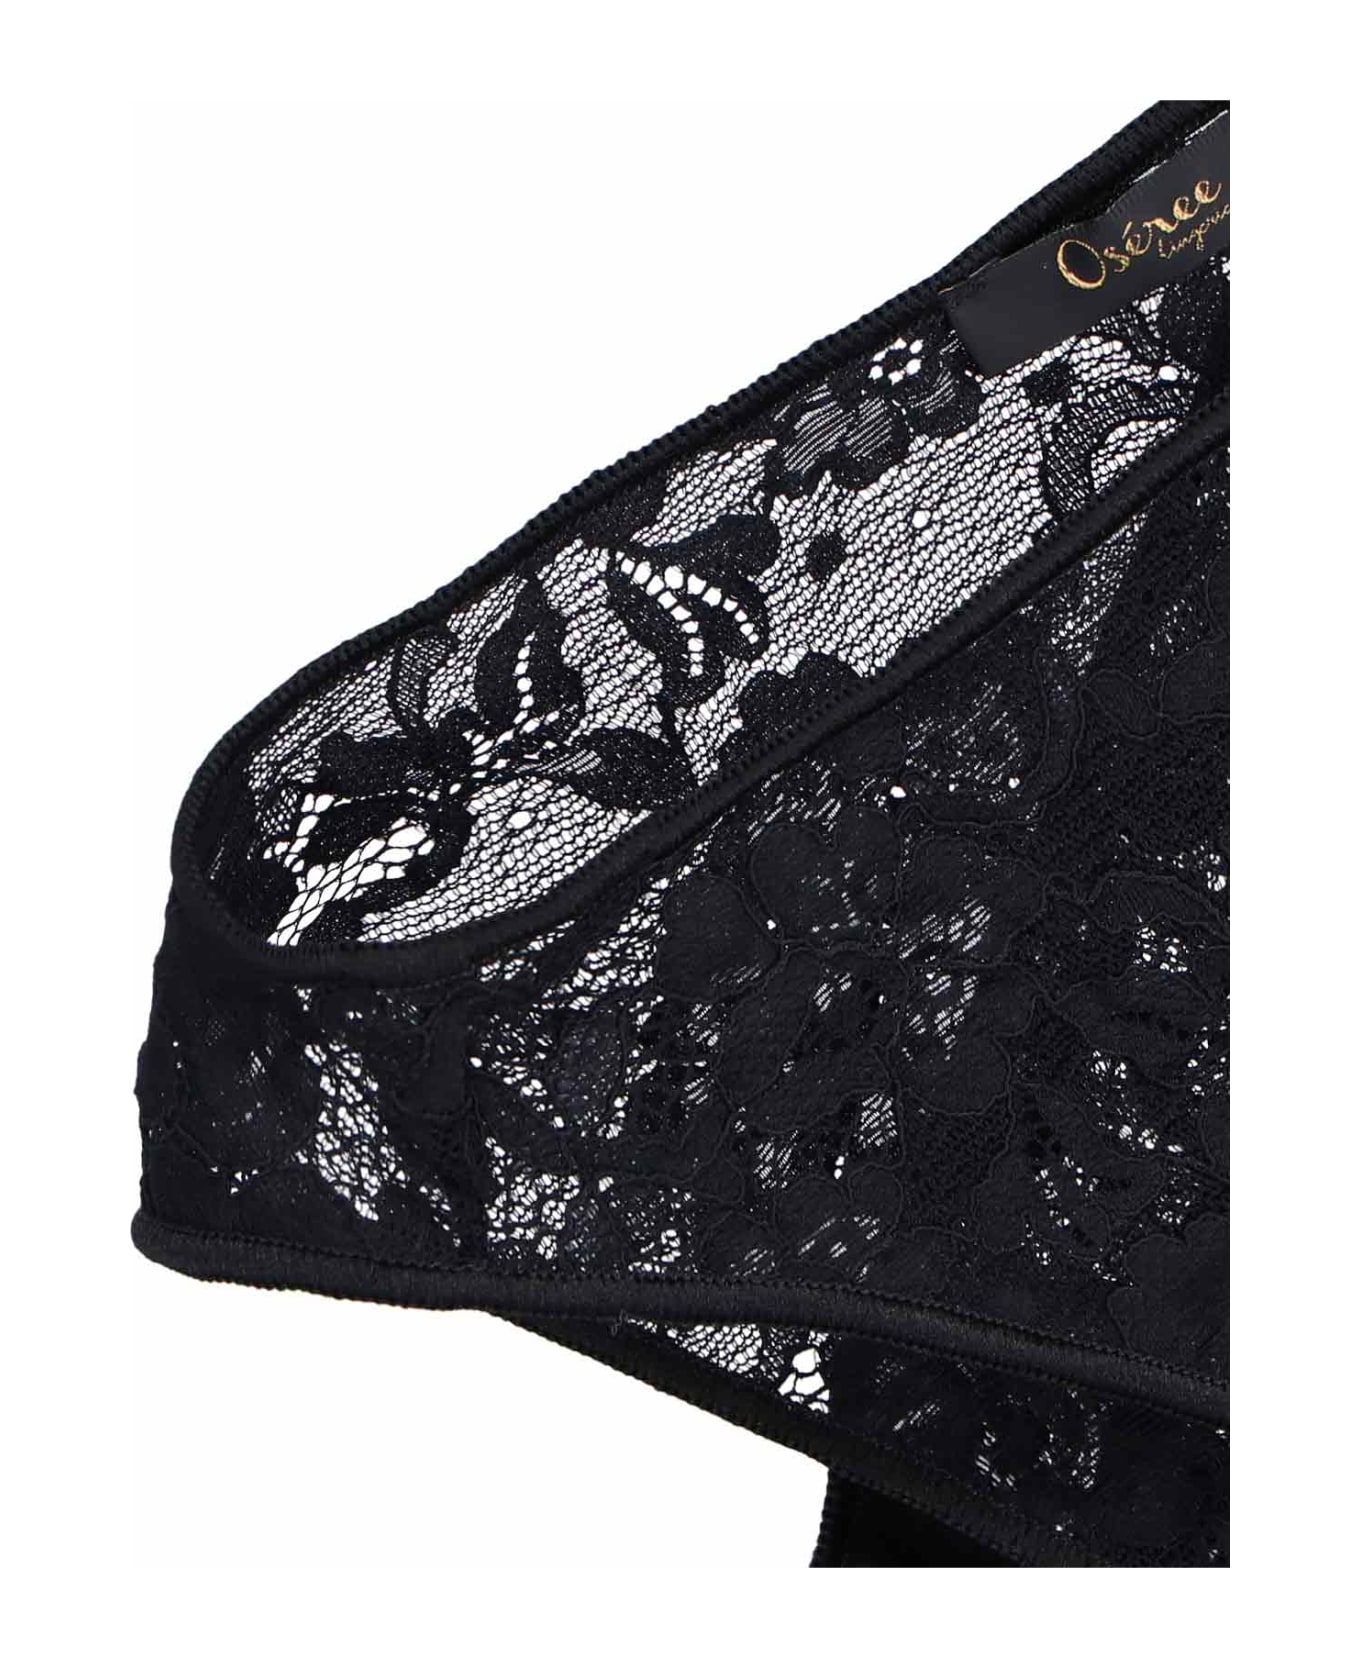 Oseree Lace Briefs - Black  